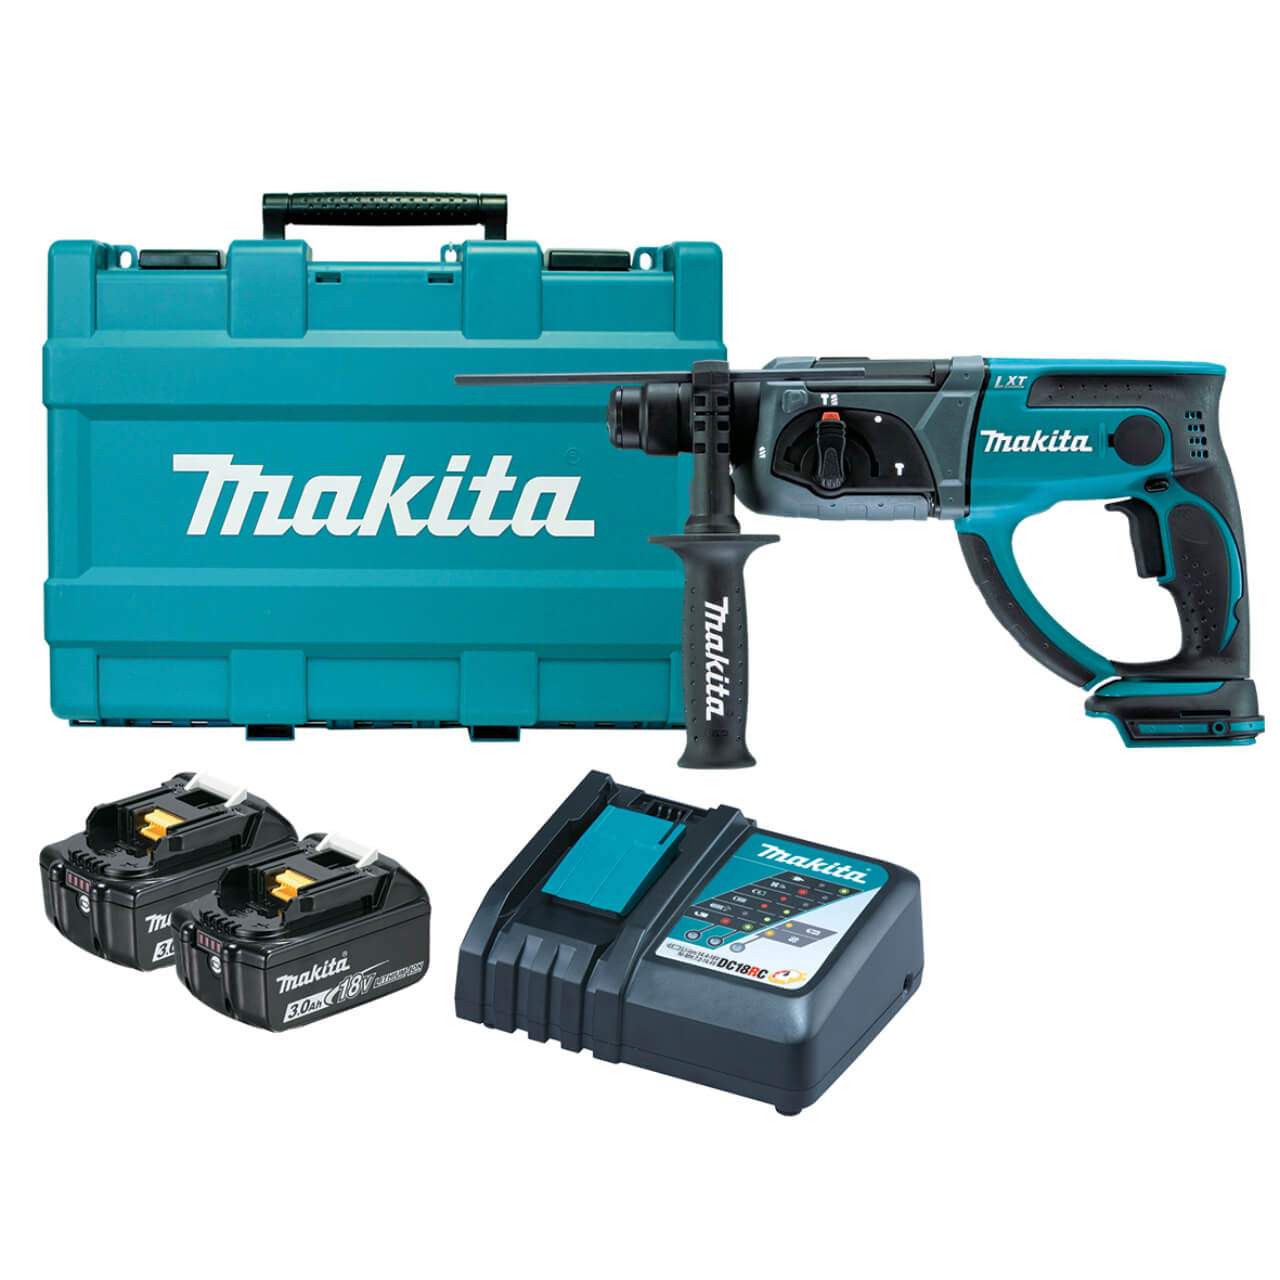 Makita 18V 20mm SDS Plus Rotary Hammer Kit - Includes 2 x 3.0Ah Batteries. Rapid Charger & Carry Case